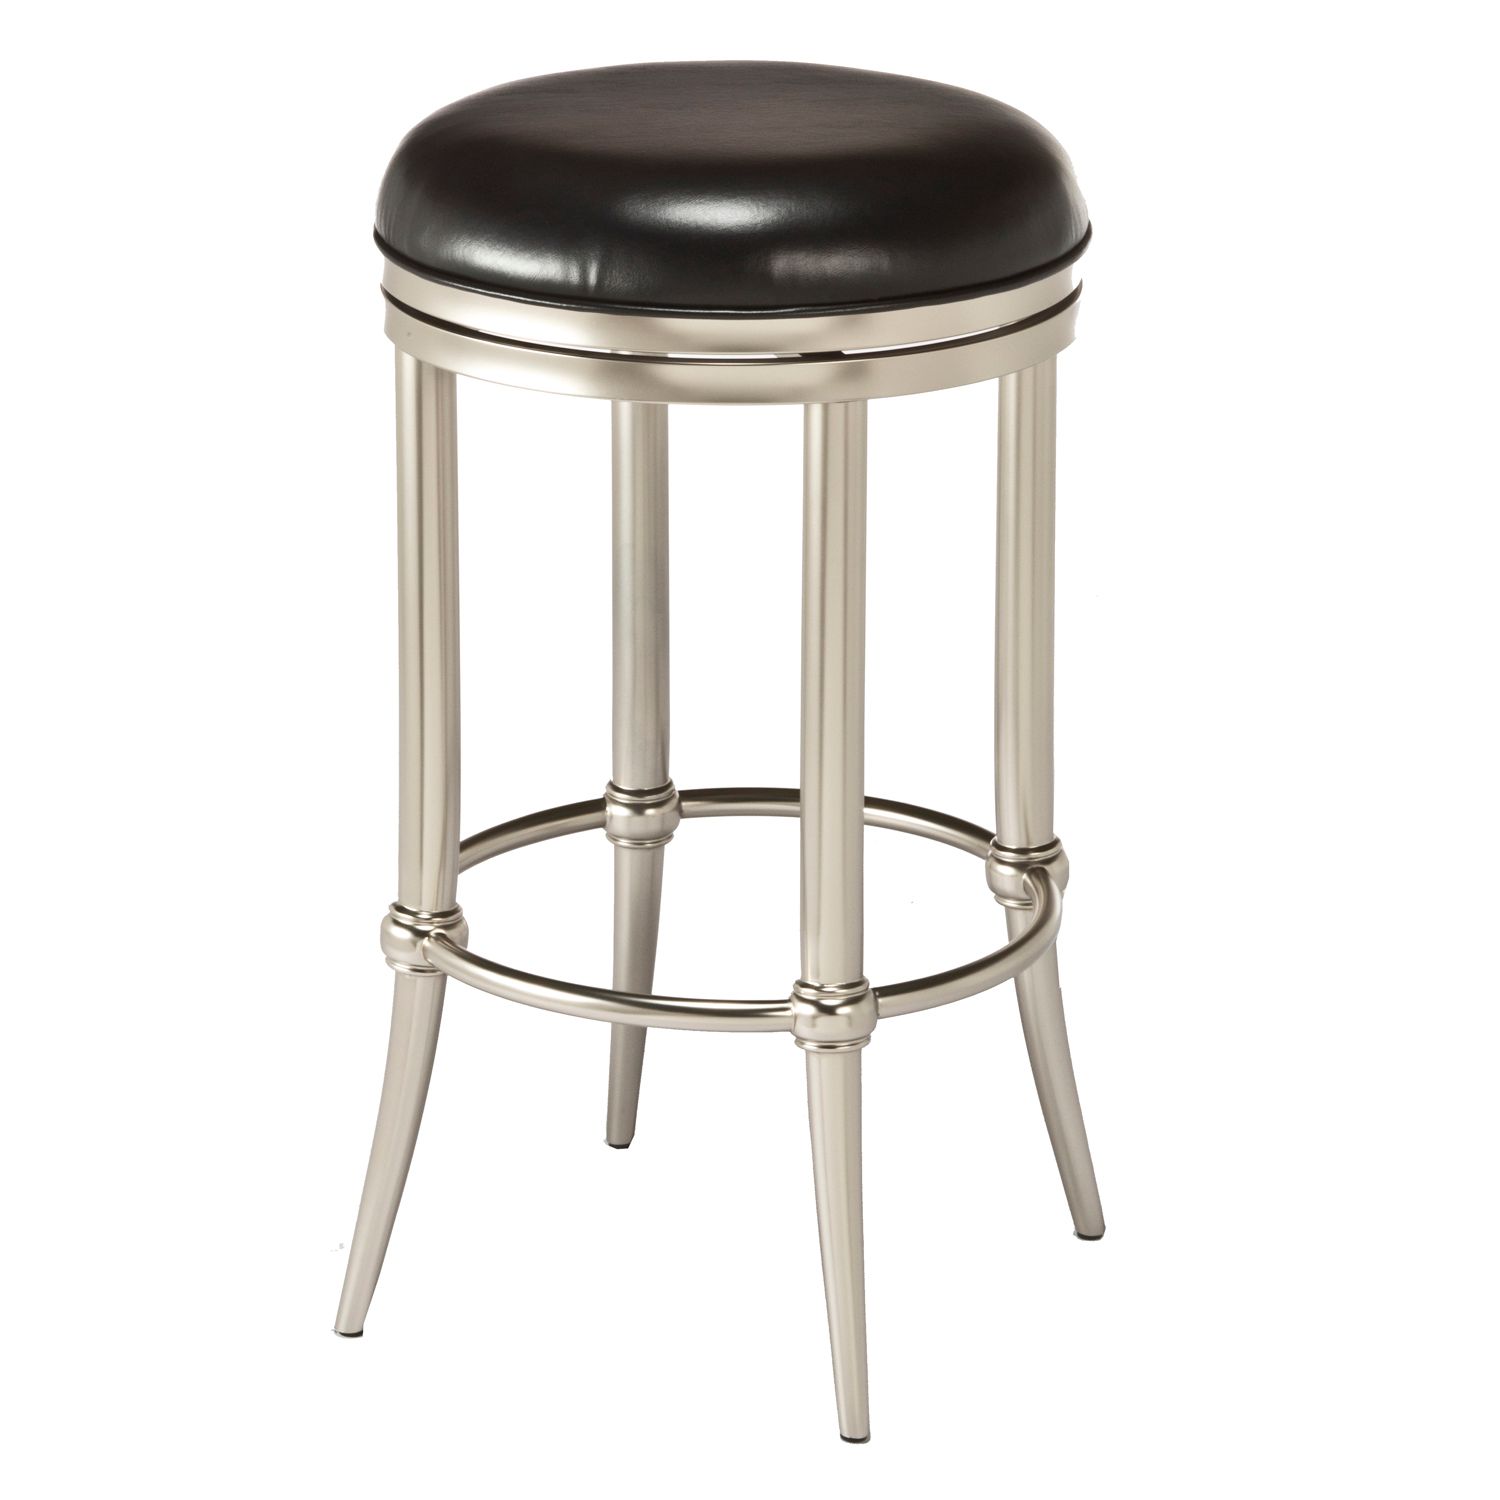 Image for Hillsdale Furniture Cadman Swivel Counter Stool at Kohl's.